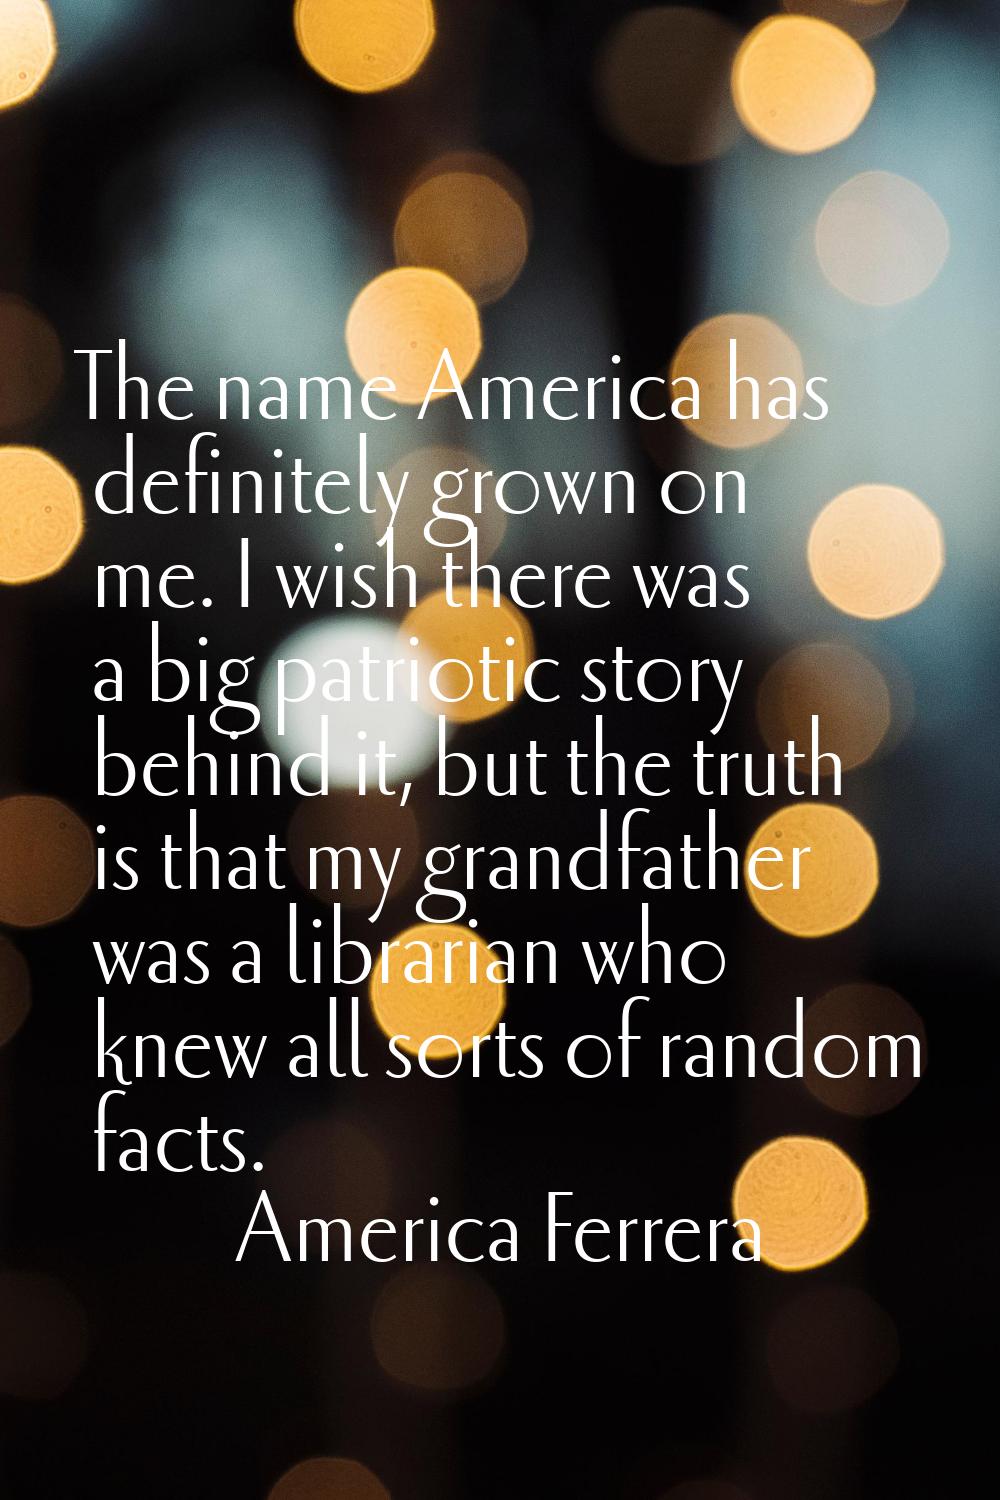 The name America has definitely grown on me. I wish there was a big patriotic story behind it, but 